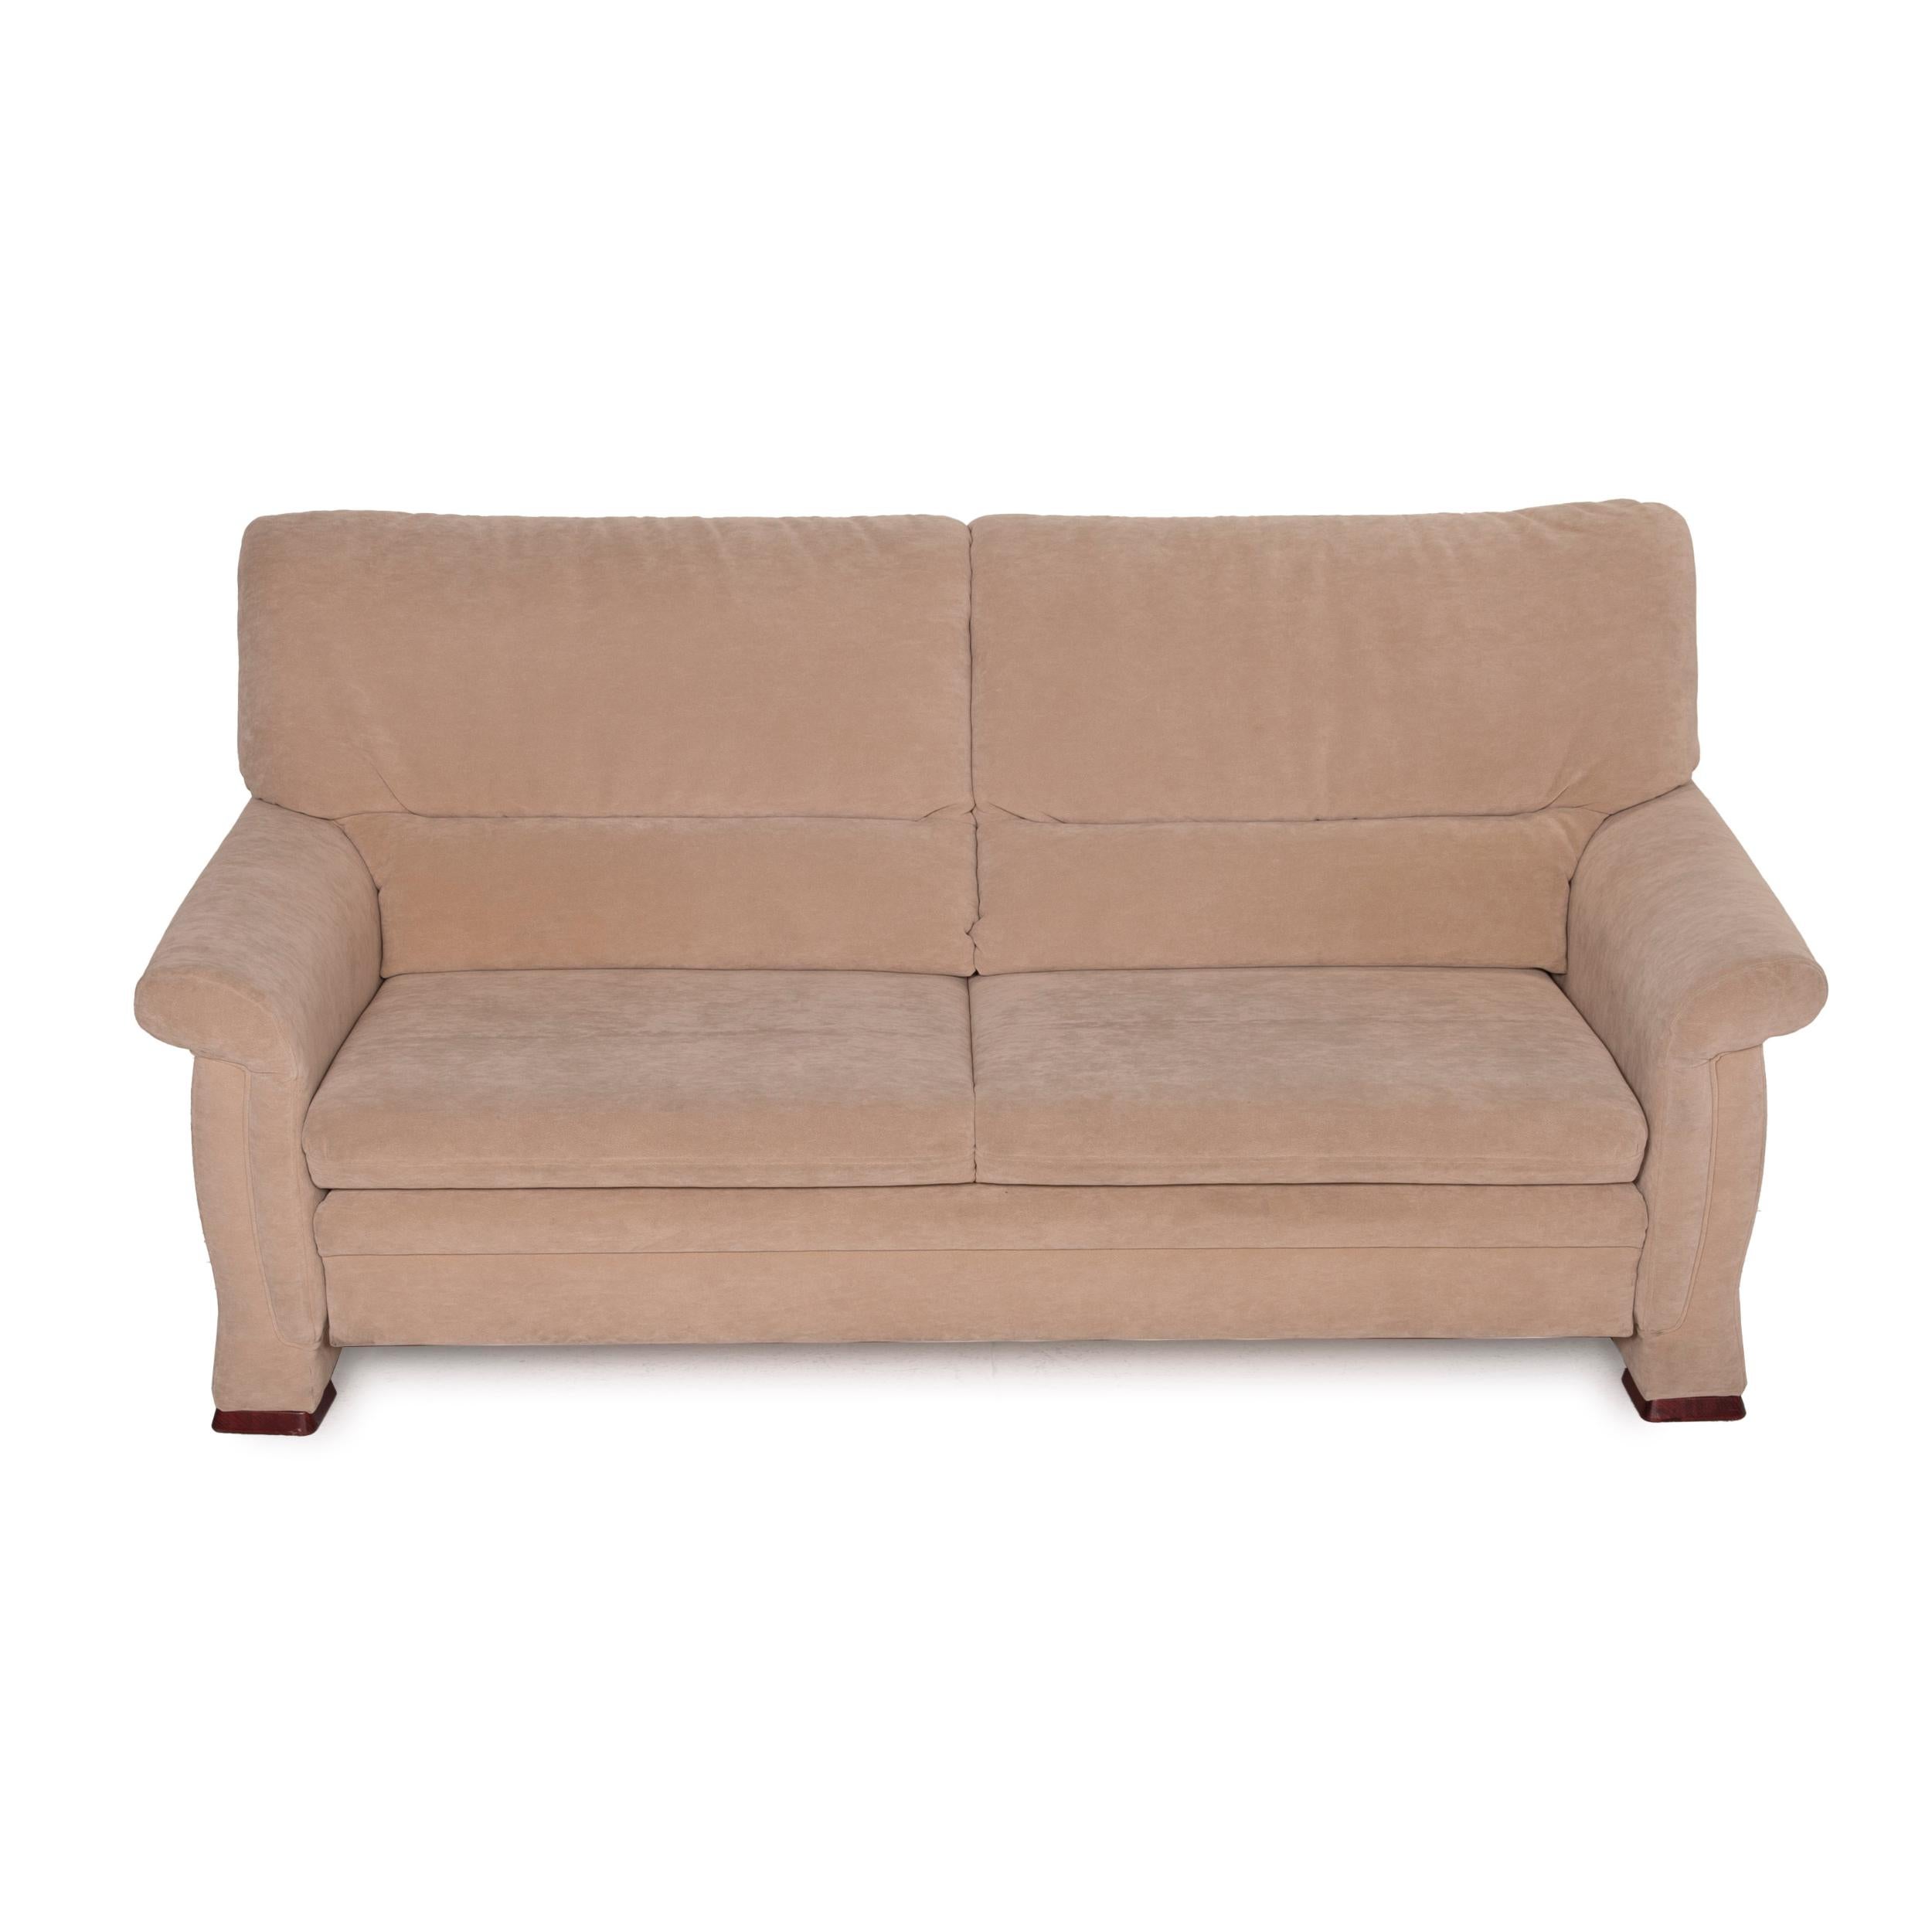 Himolla Microfiber Sofa Beige Two-Seater Sofa Bed Sleeping Function For Sale 3